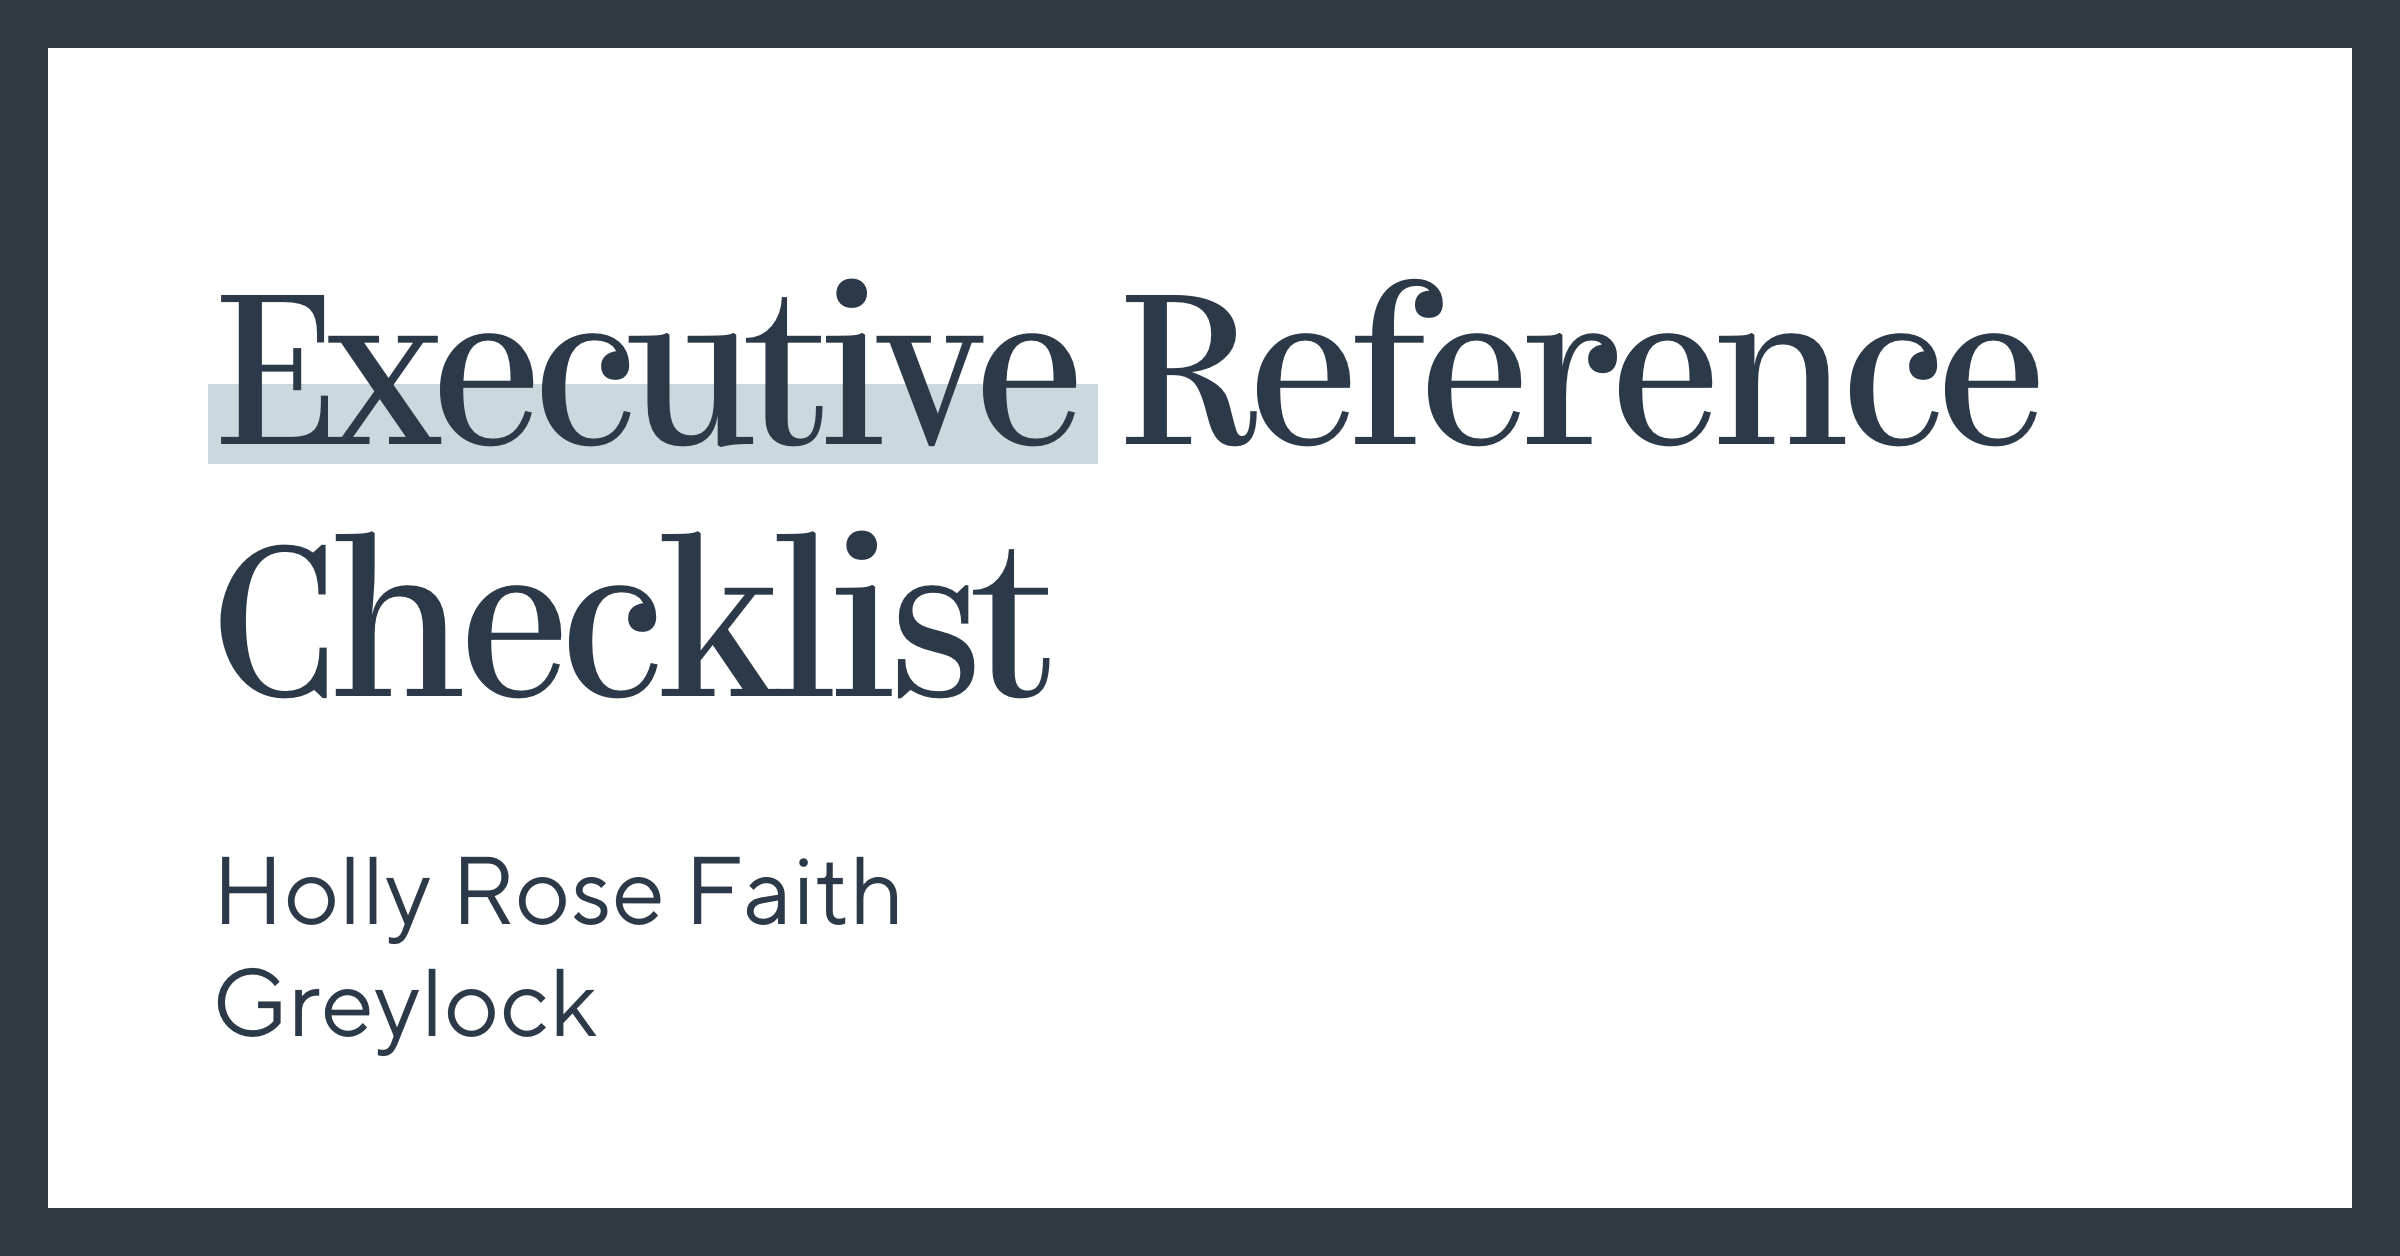 Executive Reference Checklist